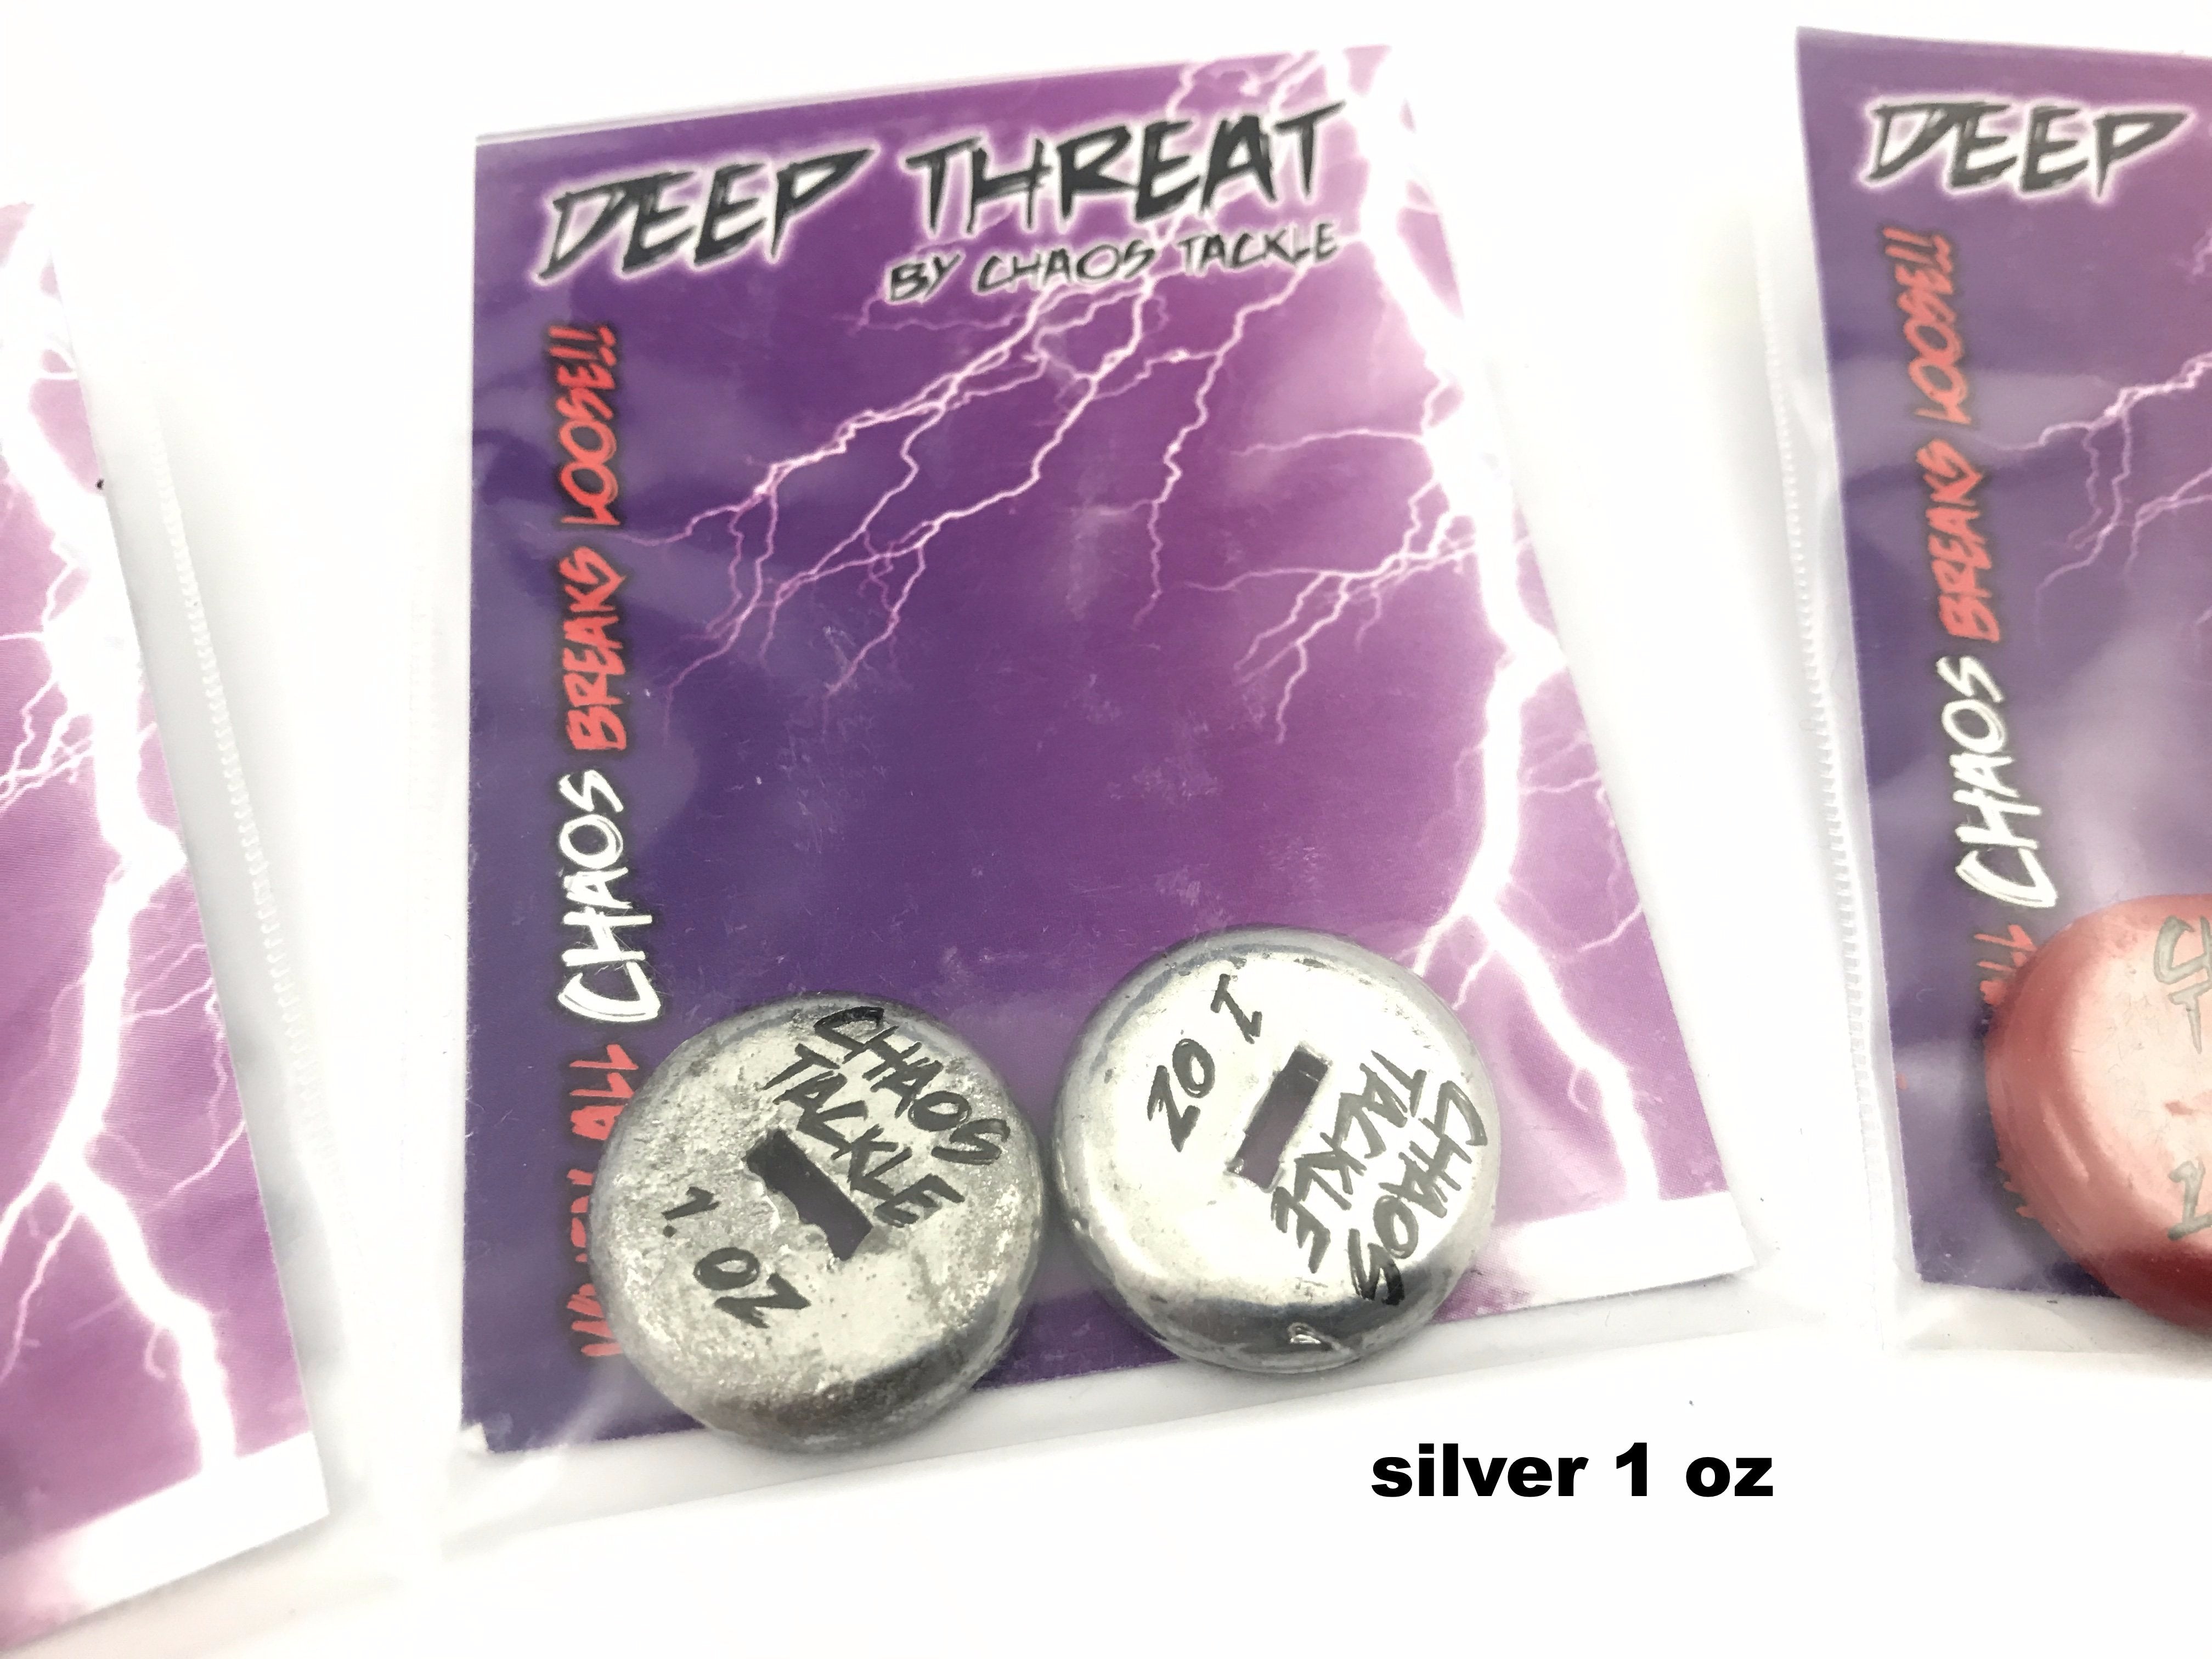 Chaos Tackle Deep Threat Weights 1/2 oz, 1 oz, or 1 1/2 oz (2 Pack